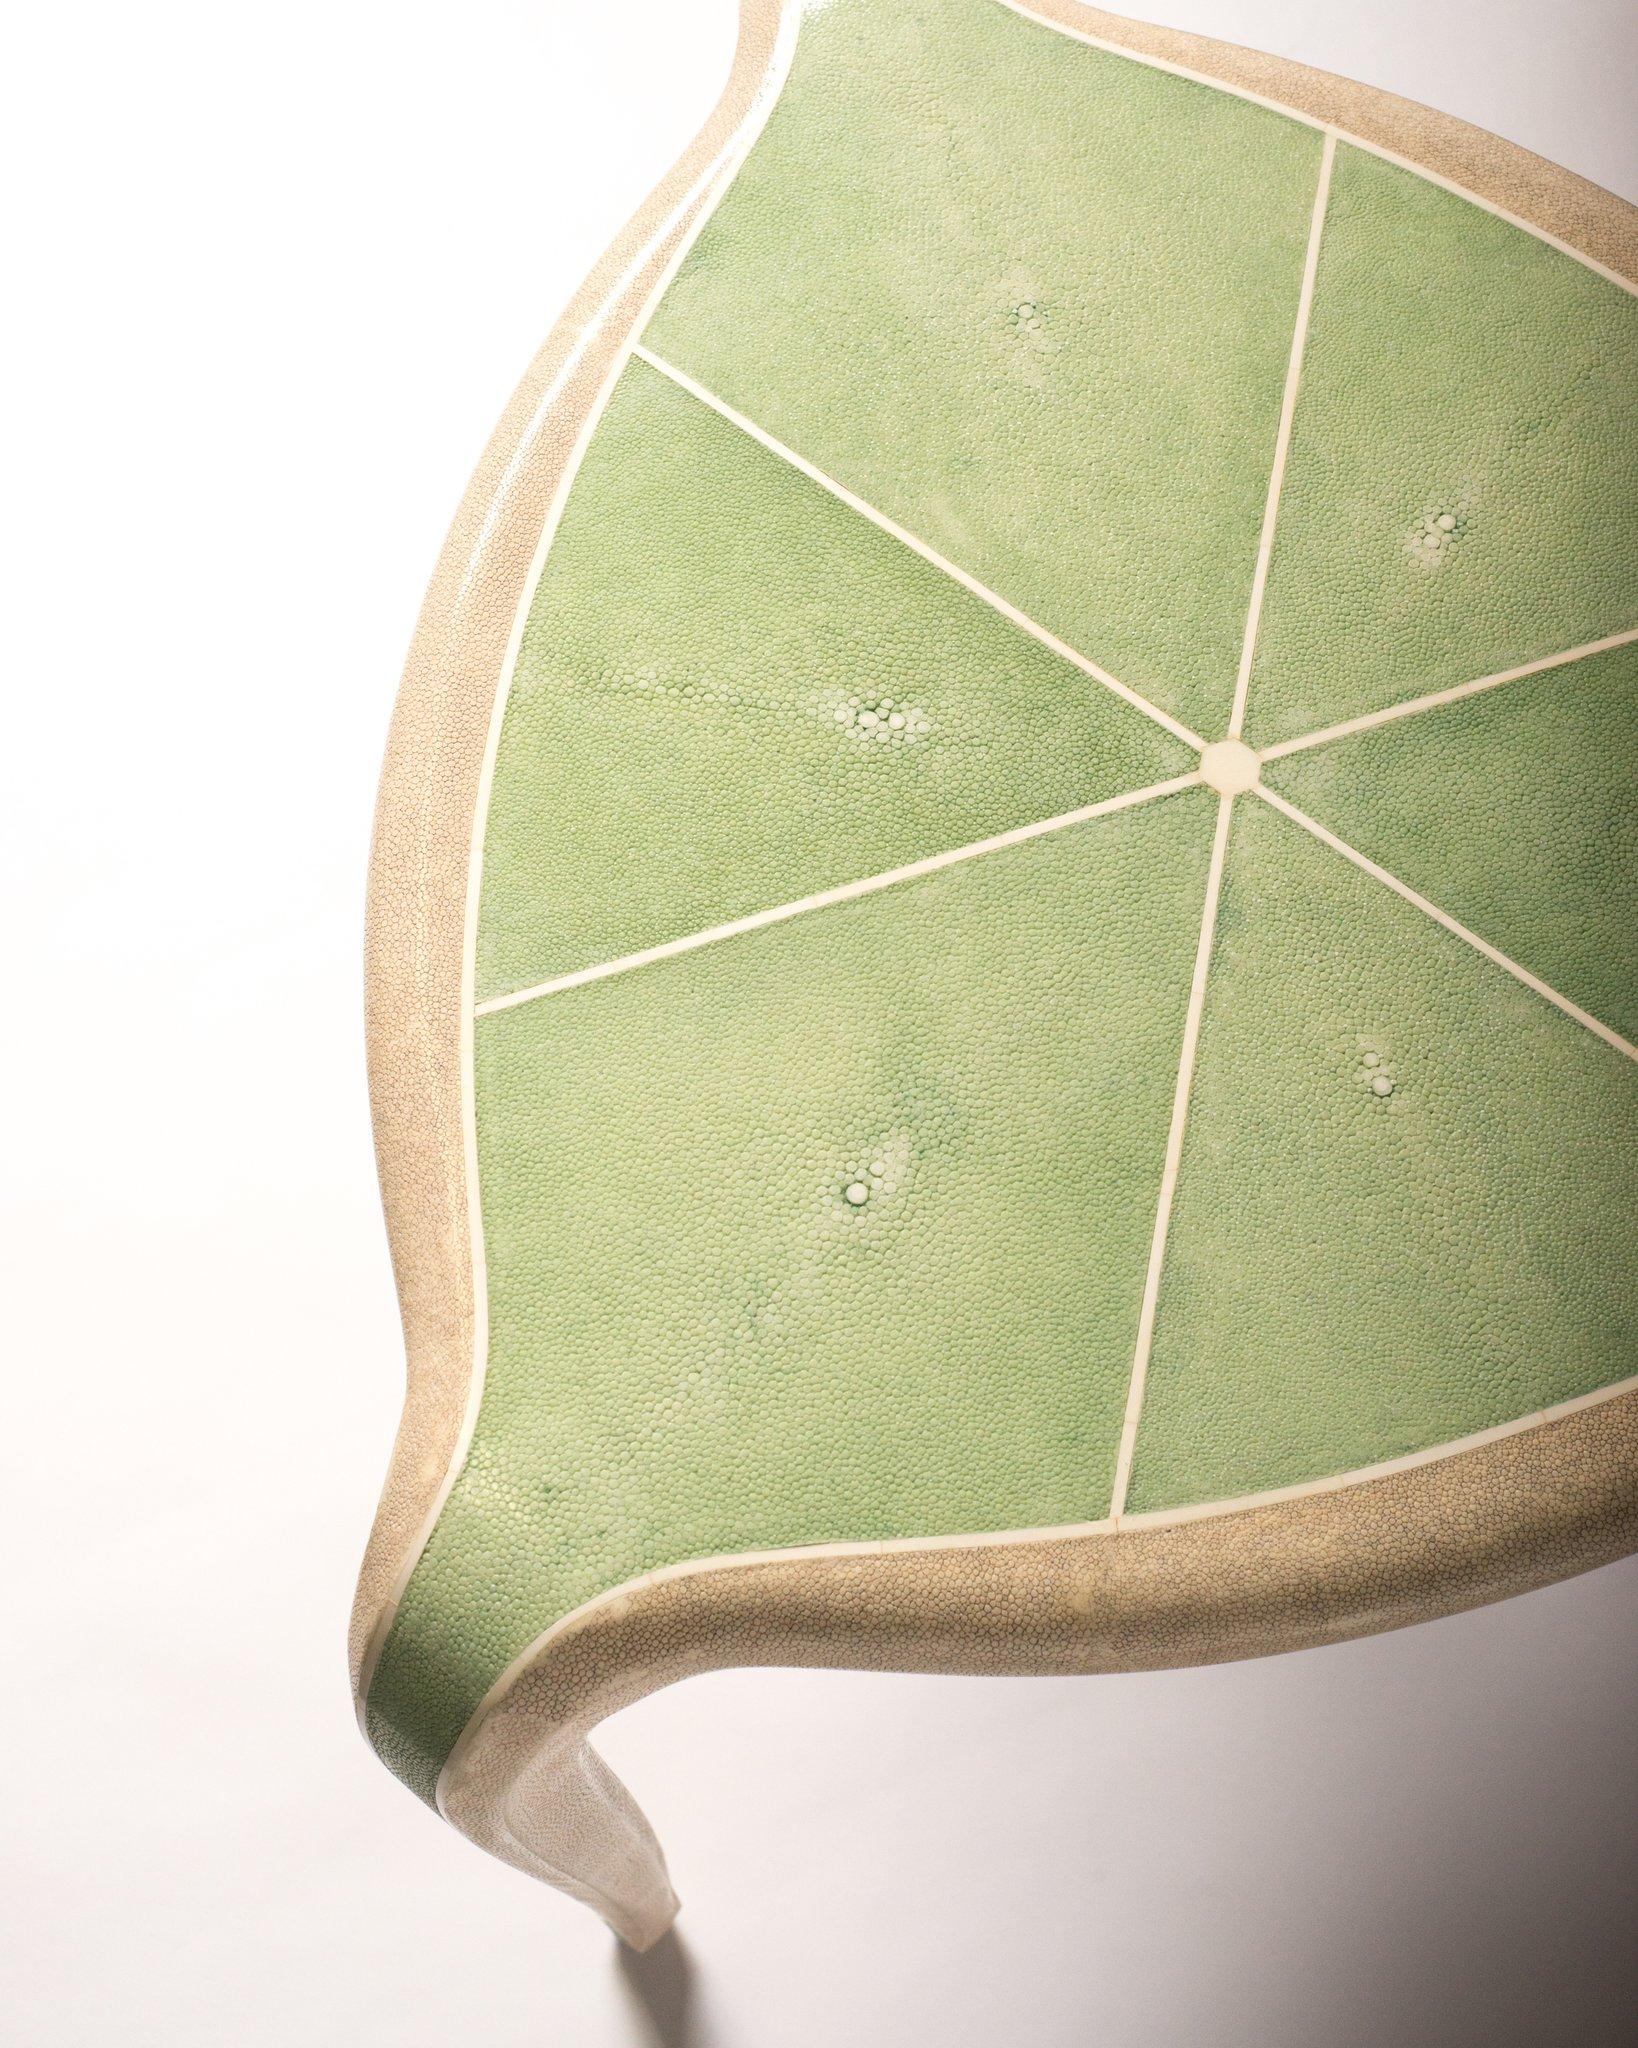 This tripod table is exquisitely crafted with a walnut veneer wood frame and completely covered in celadon green and crème shagreen and inlaid with bone. Organic curves and chamfered edges make a truly refined silhouette.